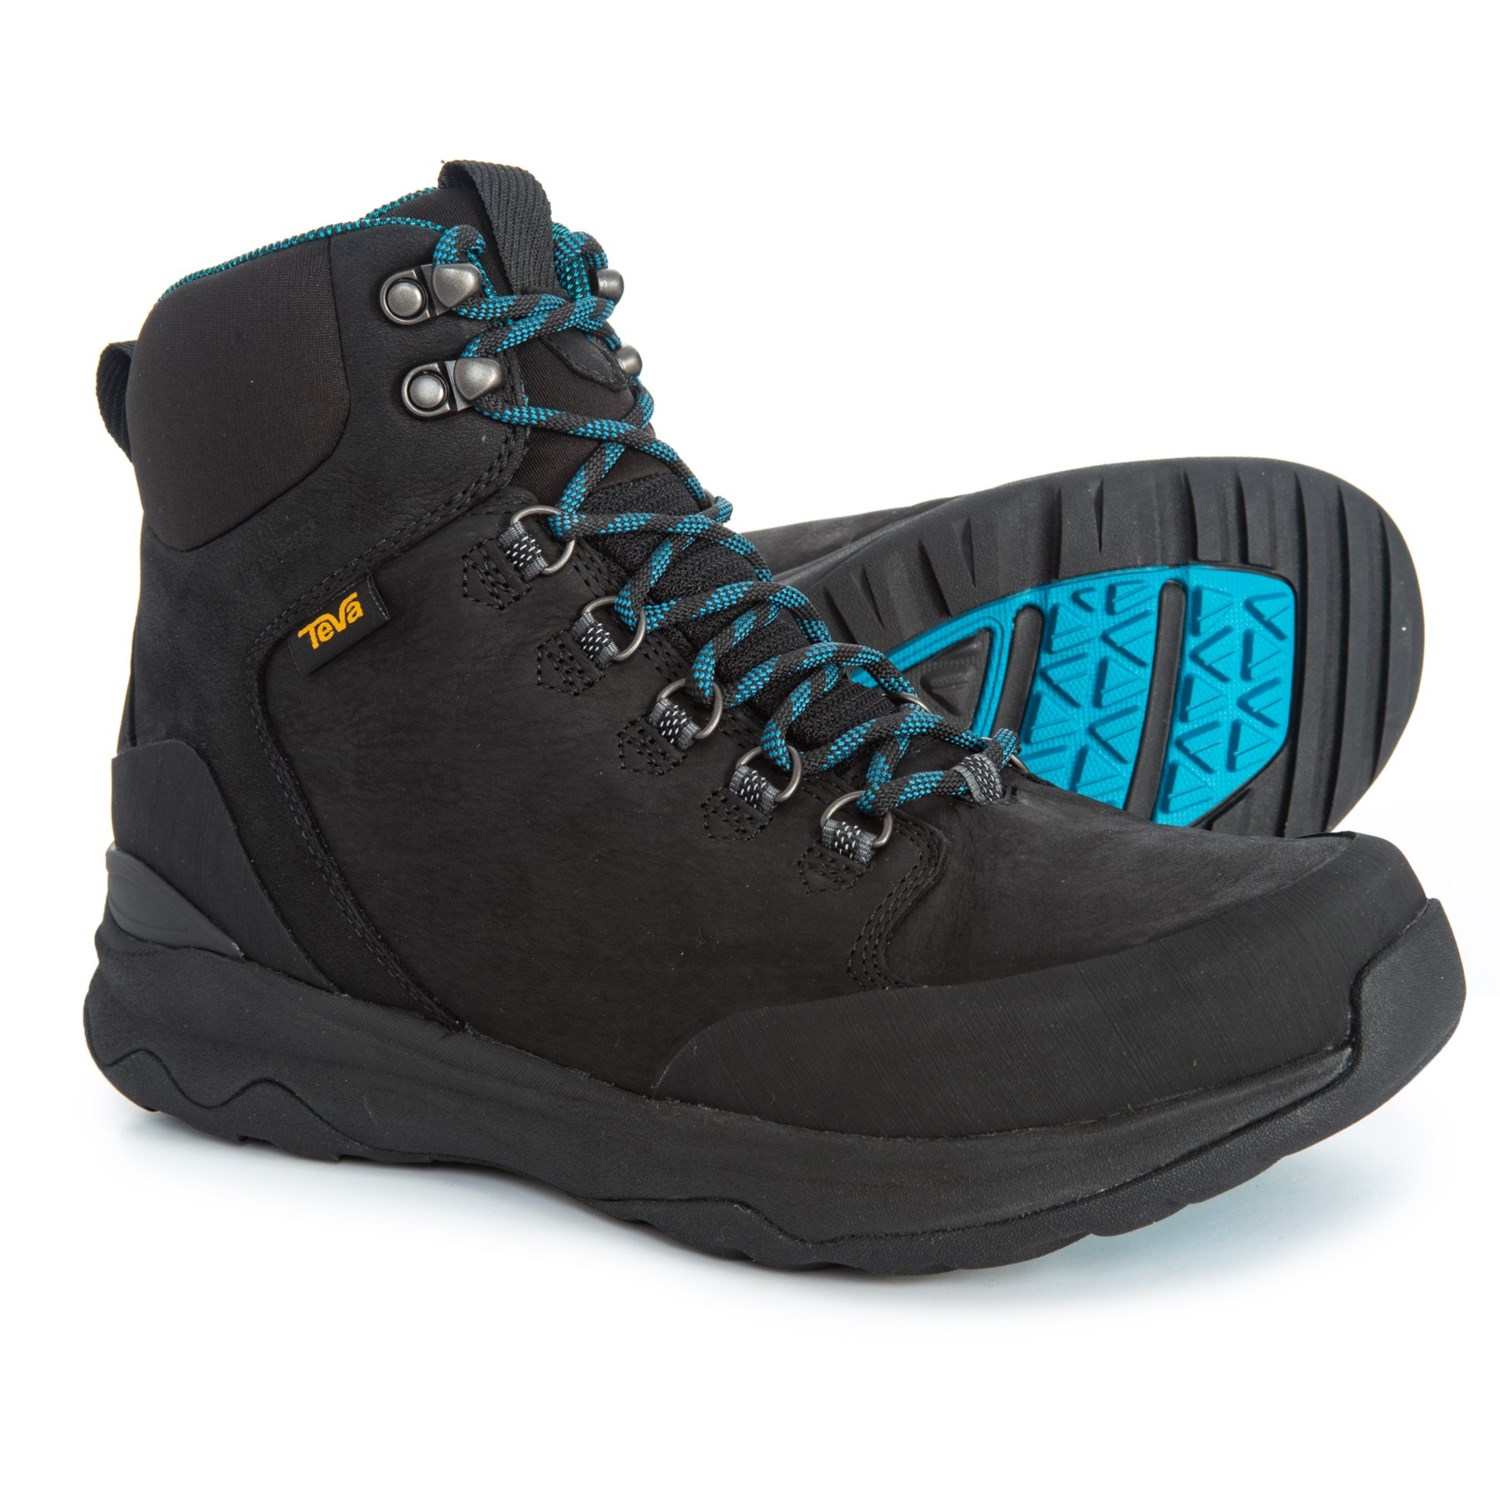 Teva Arrowood Utility Tall Hiking Boots – Waterproof, Insulated (For Men)